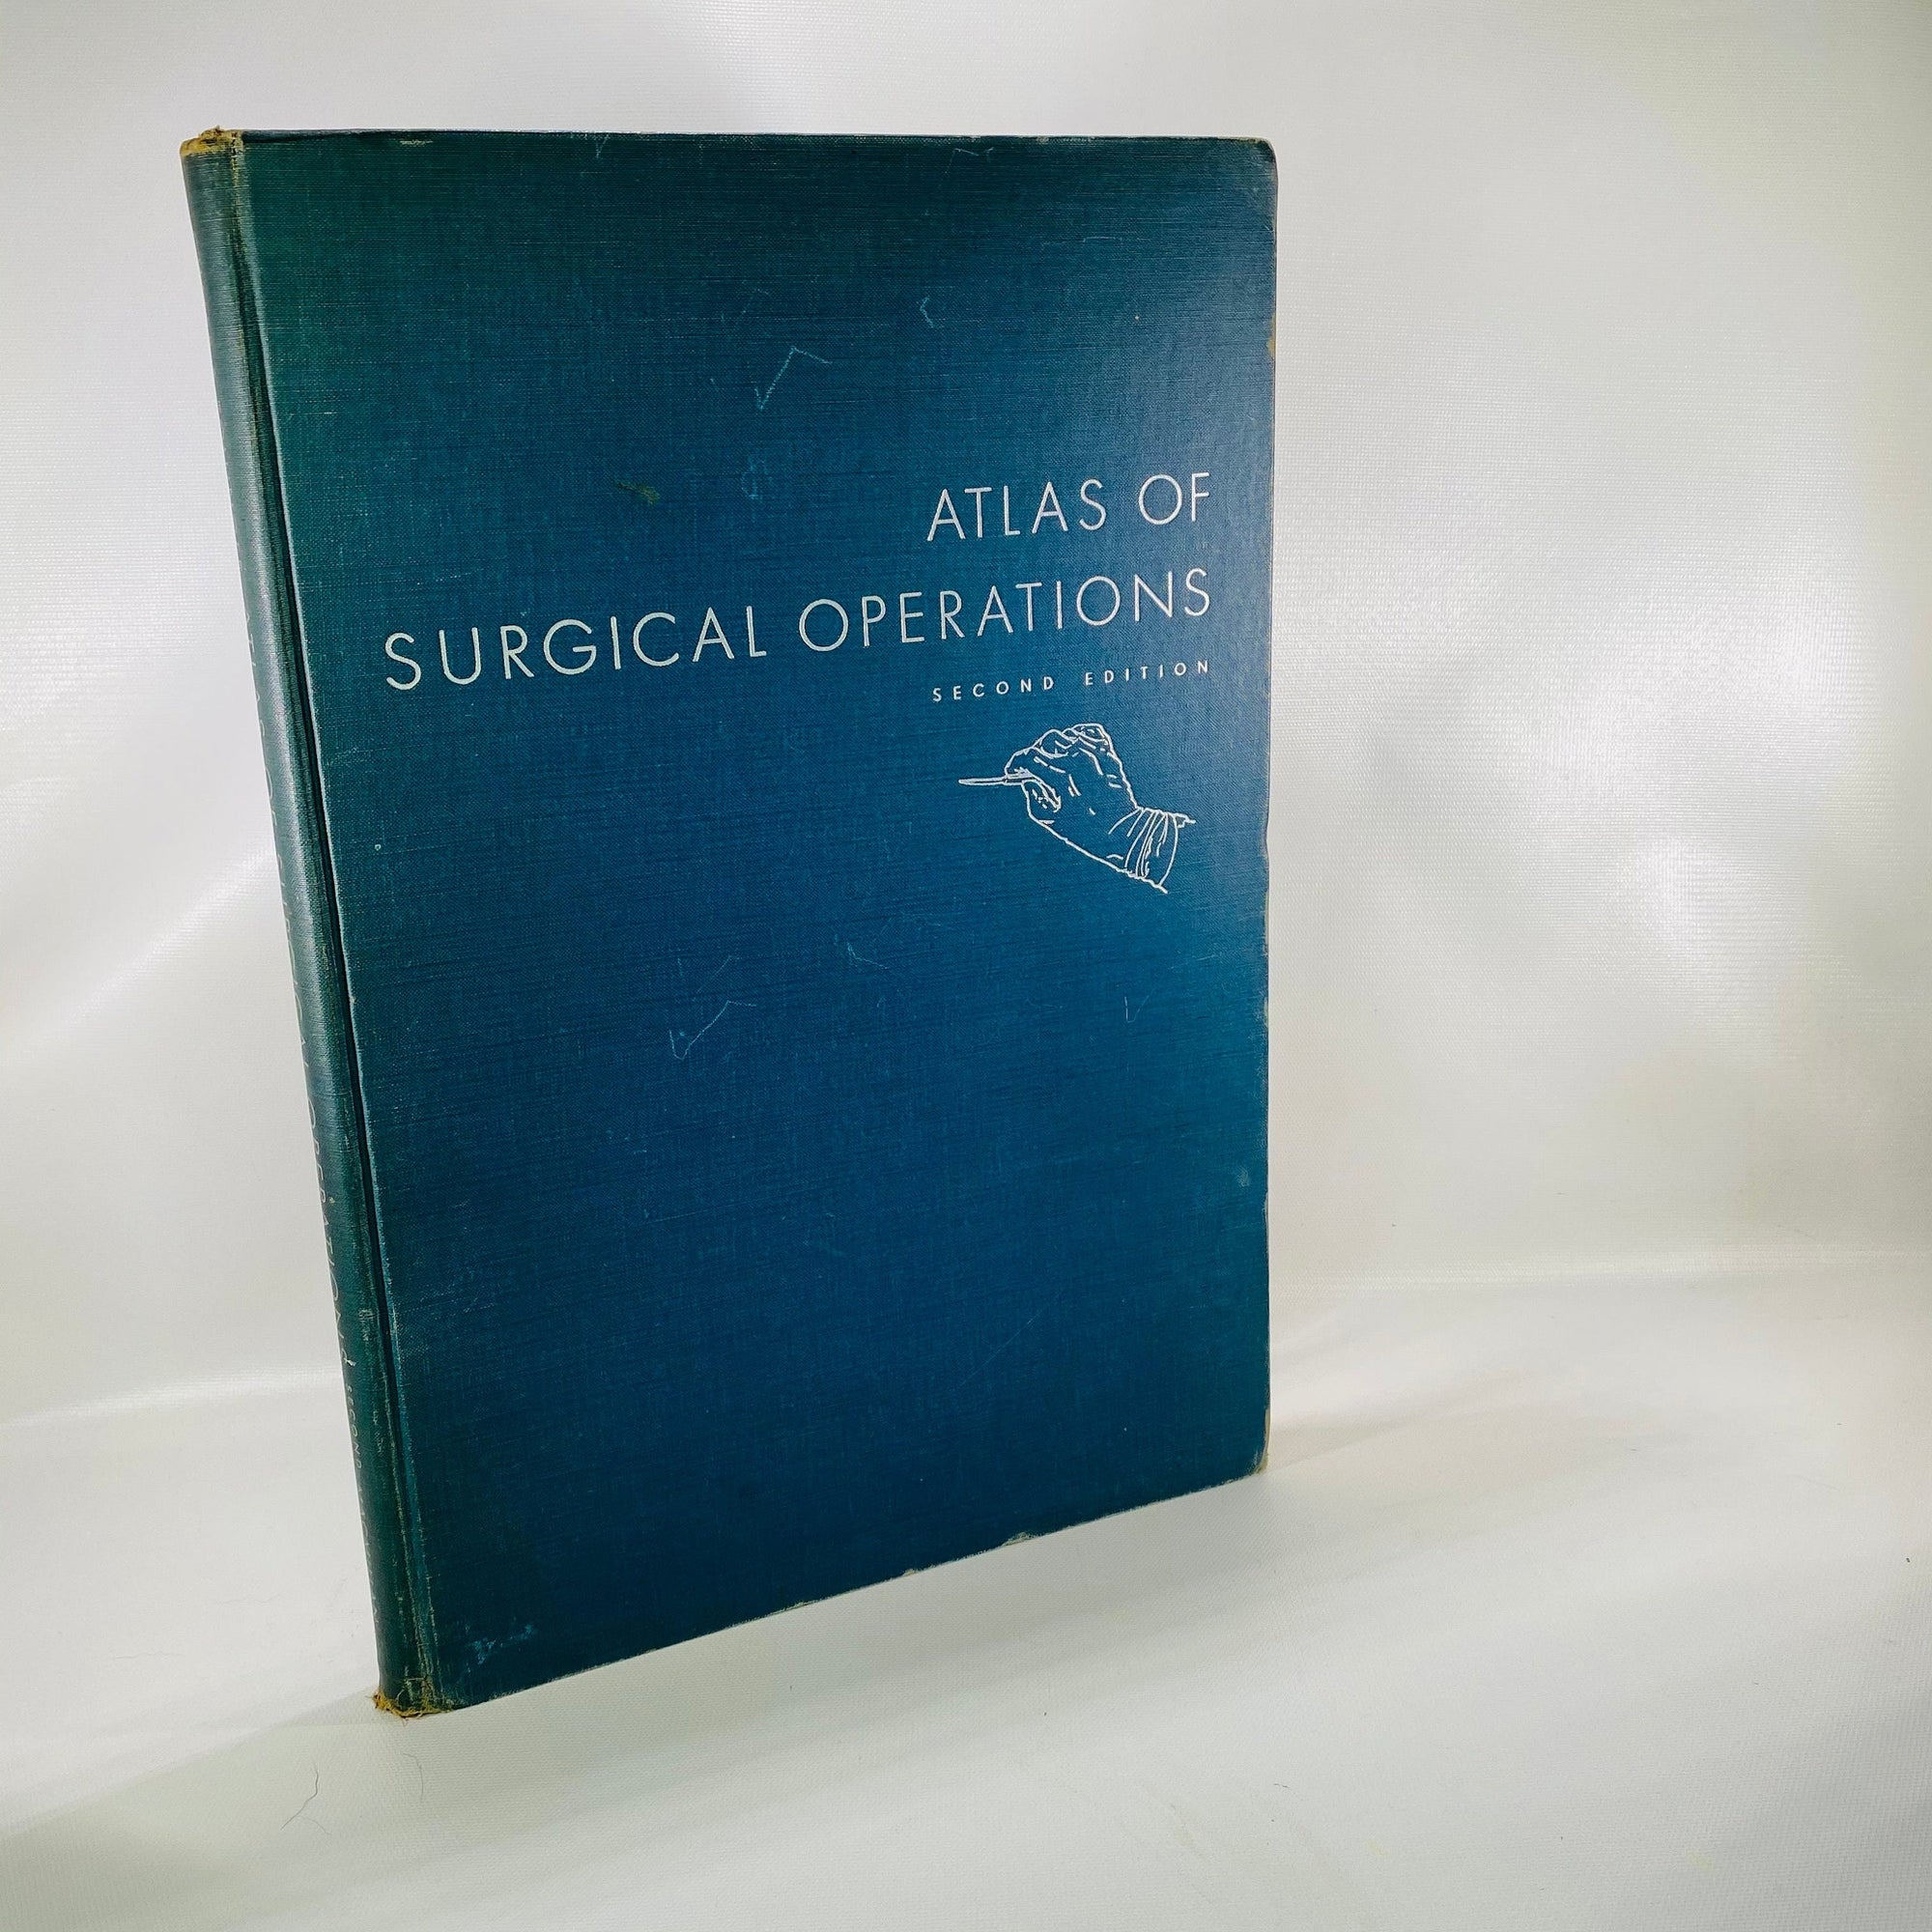 The Atlas of Surgical Operations by Elliot Cutler 1949 Macmillan Company Vintage Book